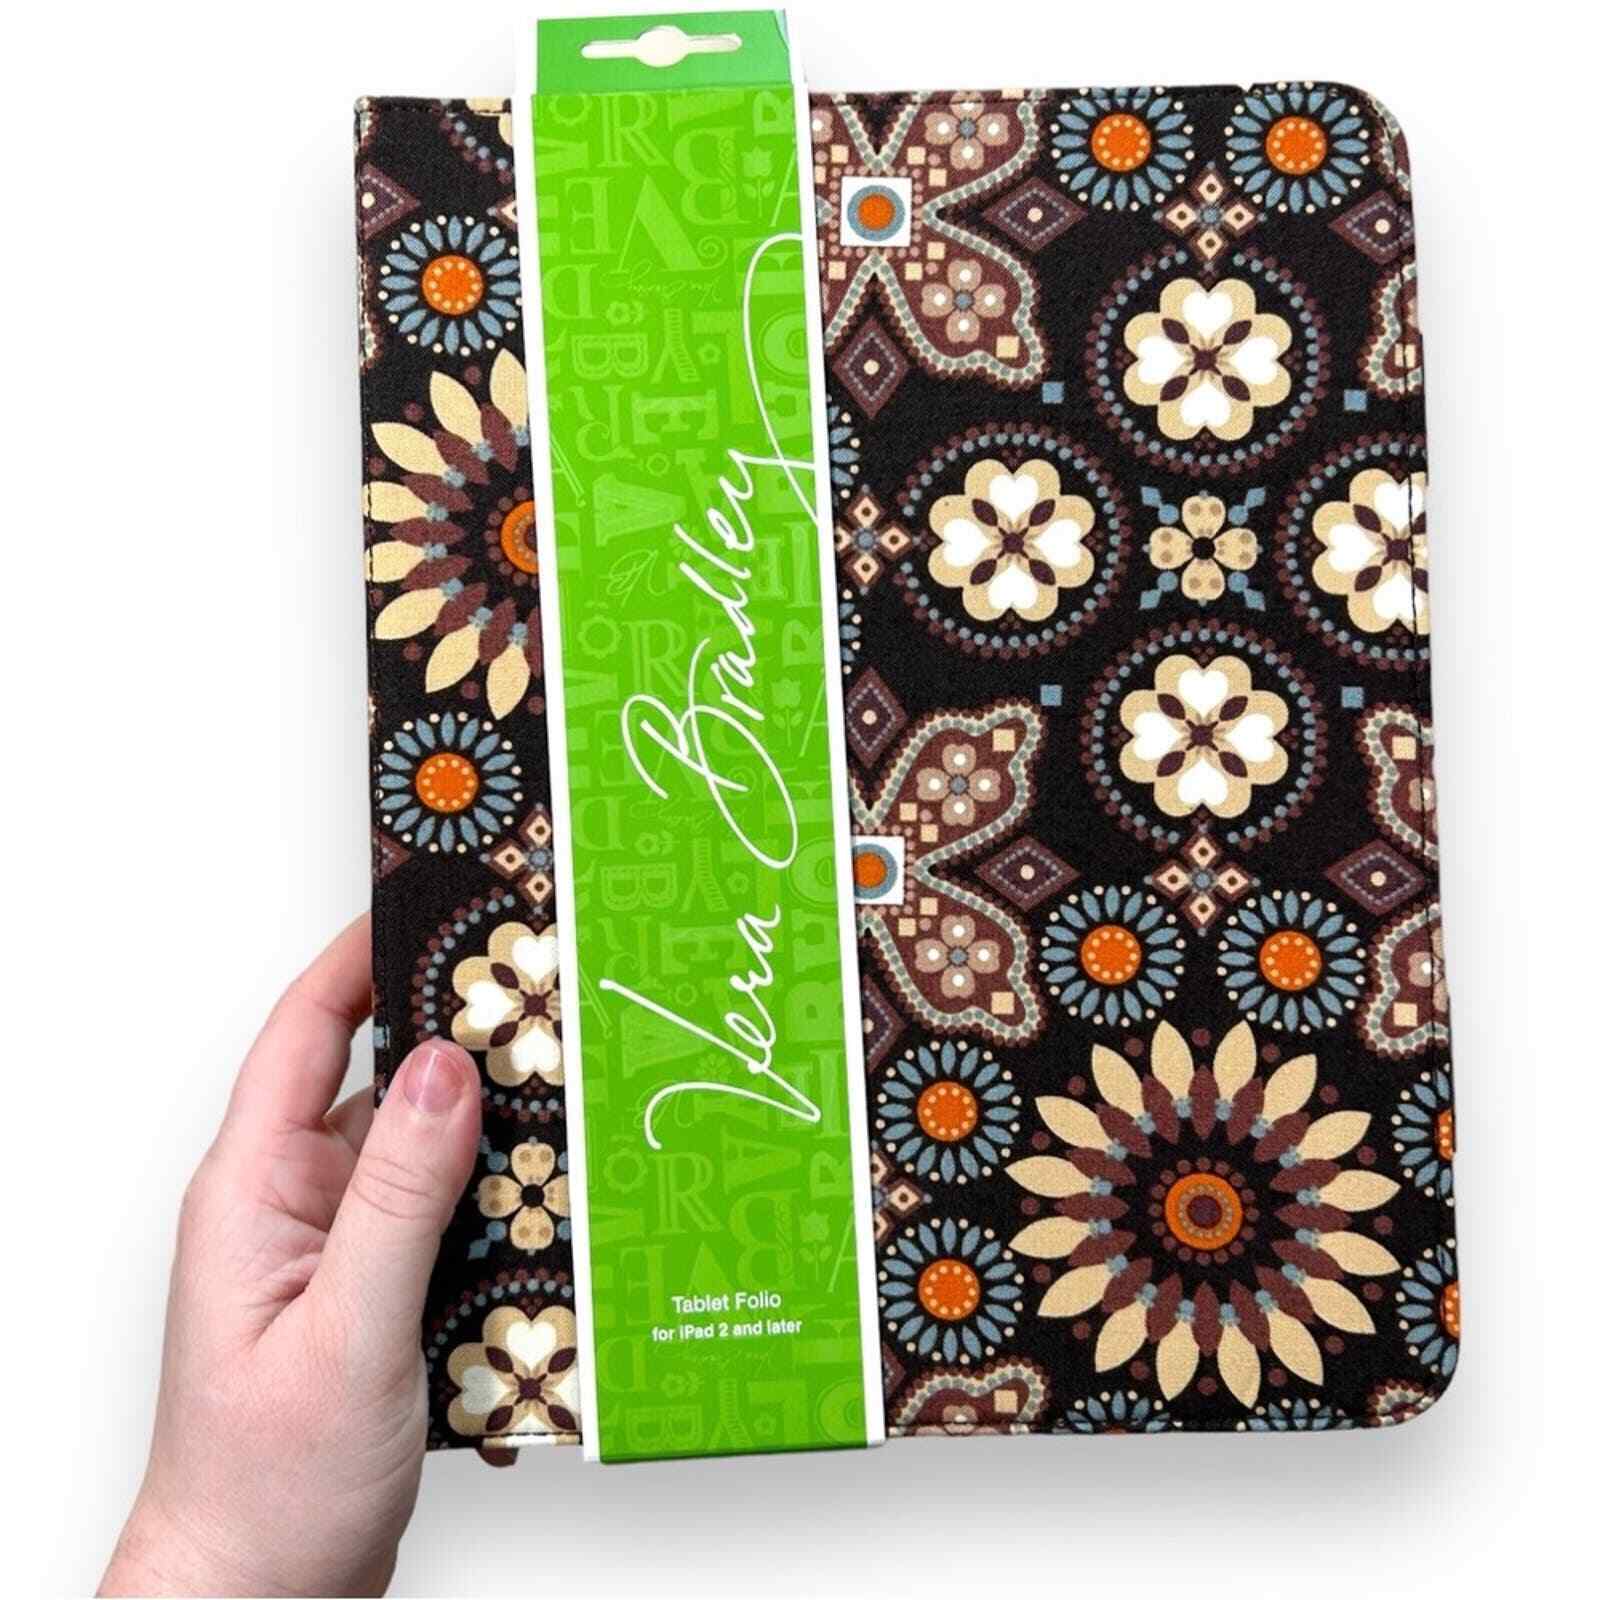 NWT Vera Bradley Canyon Print Brown Quilted iPad Tablet Case for IPad 2 or Later